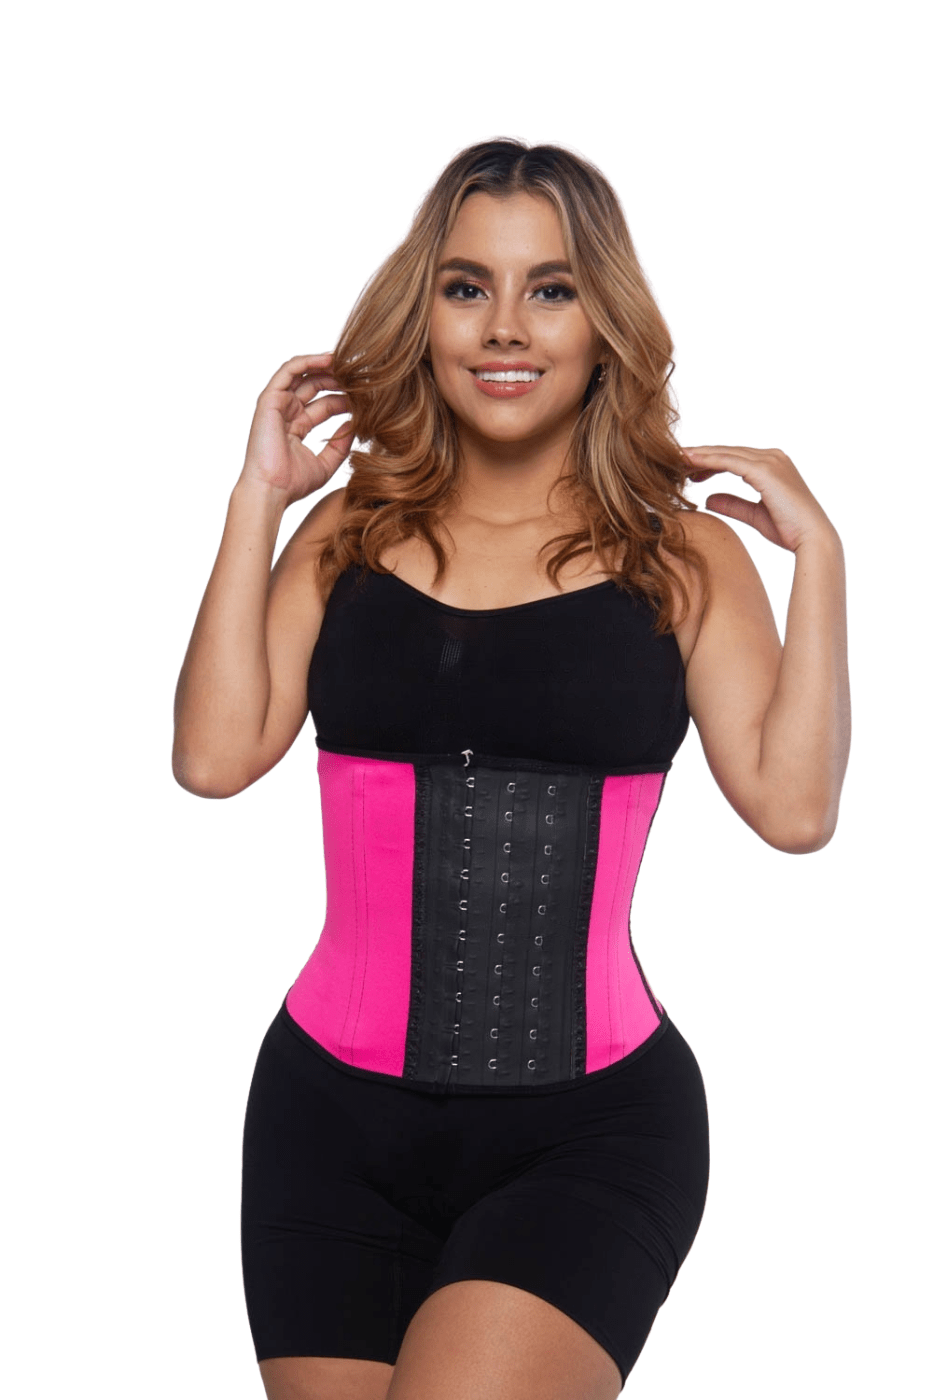 Squeez Me Skinny Waist Trainers - I TOLD YOU ALL” 3X XS smallest waist ever  3 more days 🌟 I might have to use the mini one in top of this one